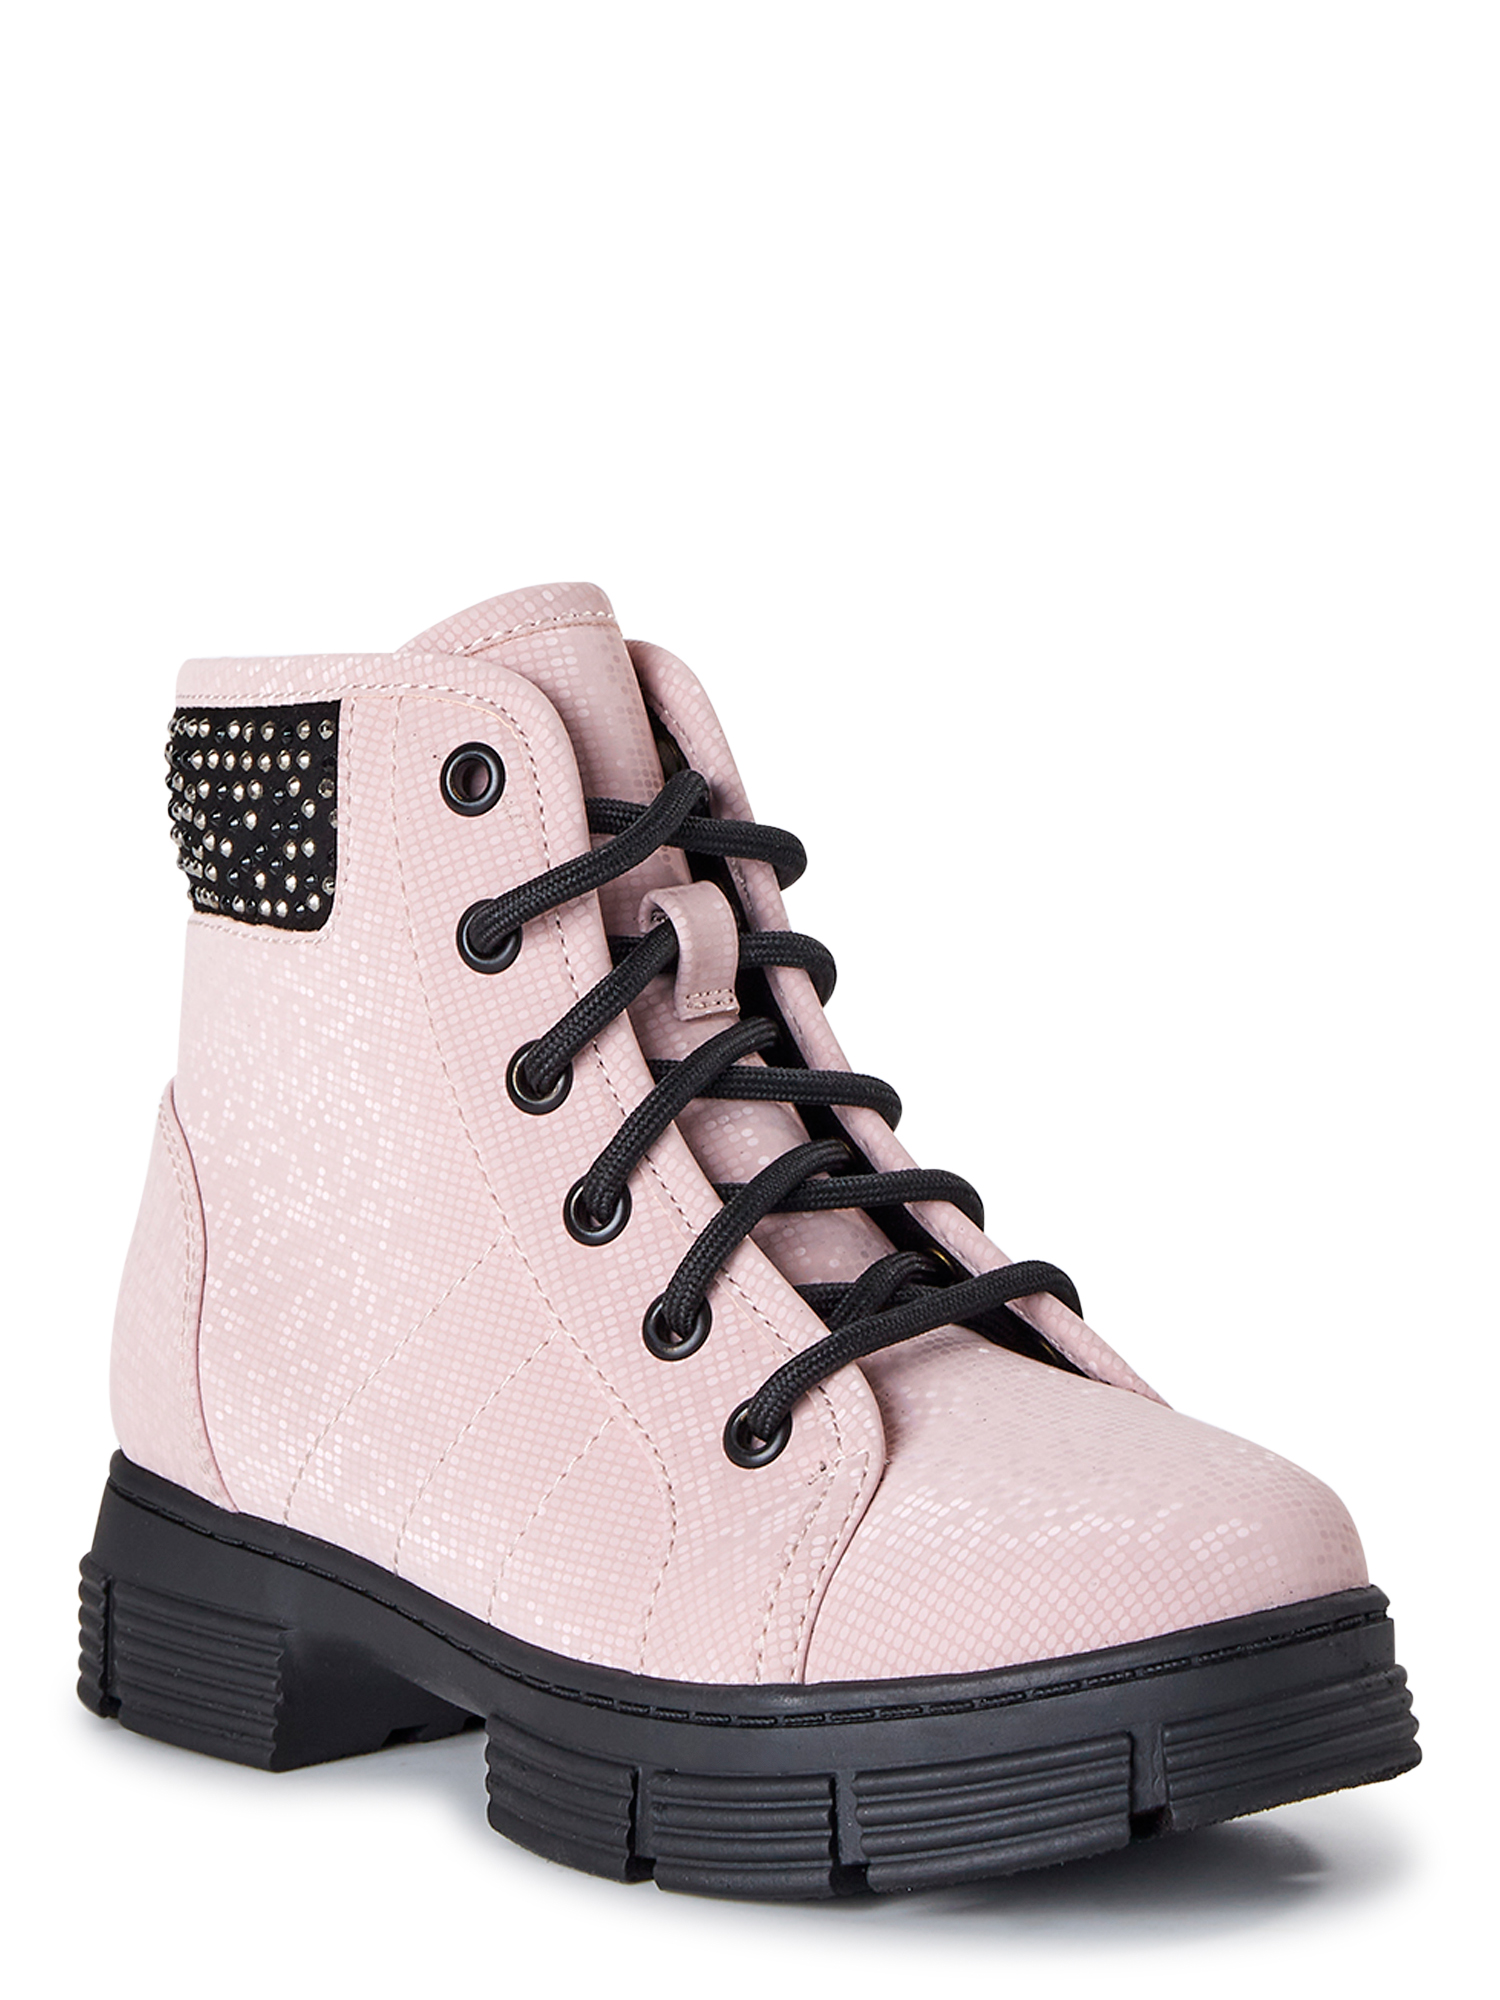 Boots,　Girls　NYC　Sizes　13-6　Madden　Combat